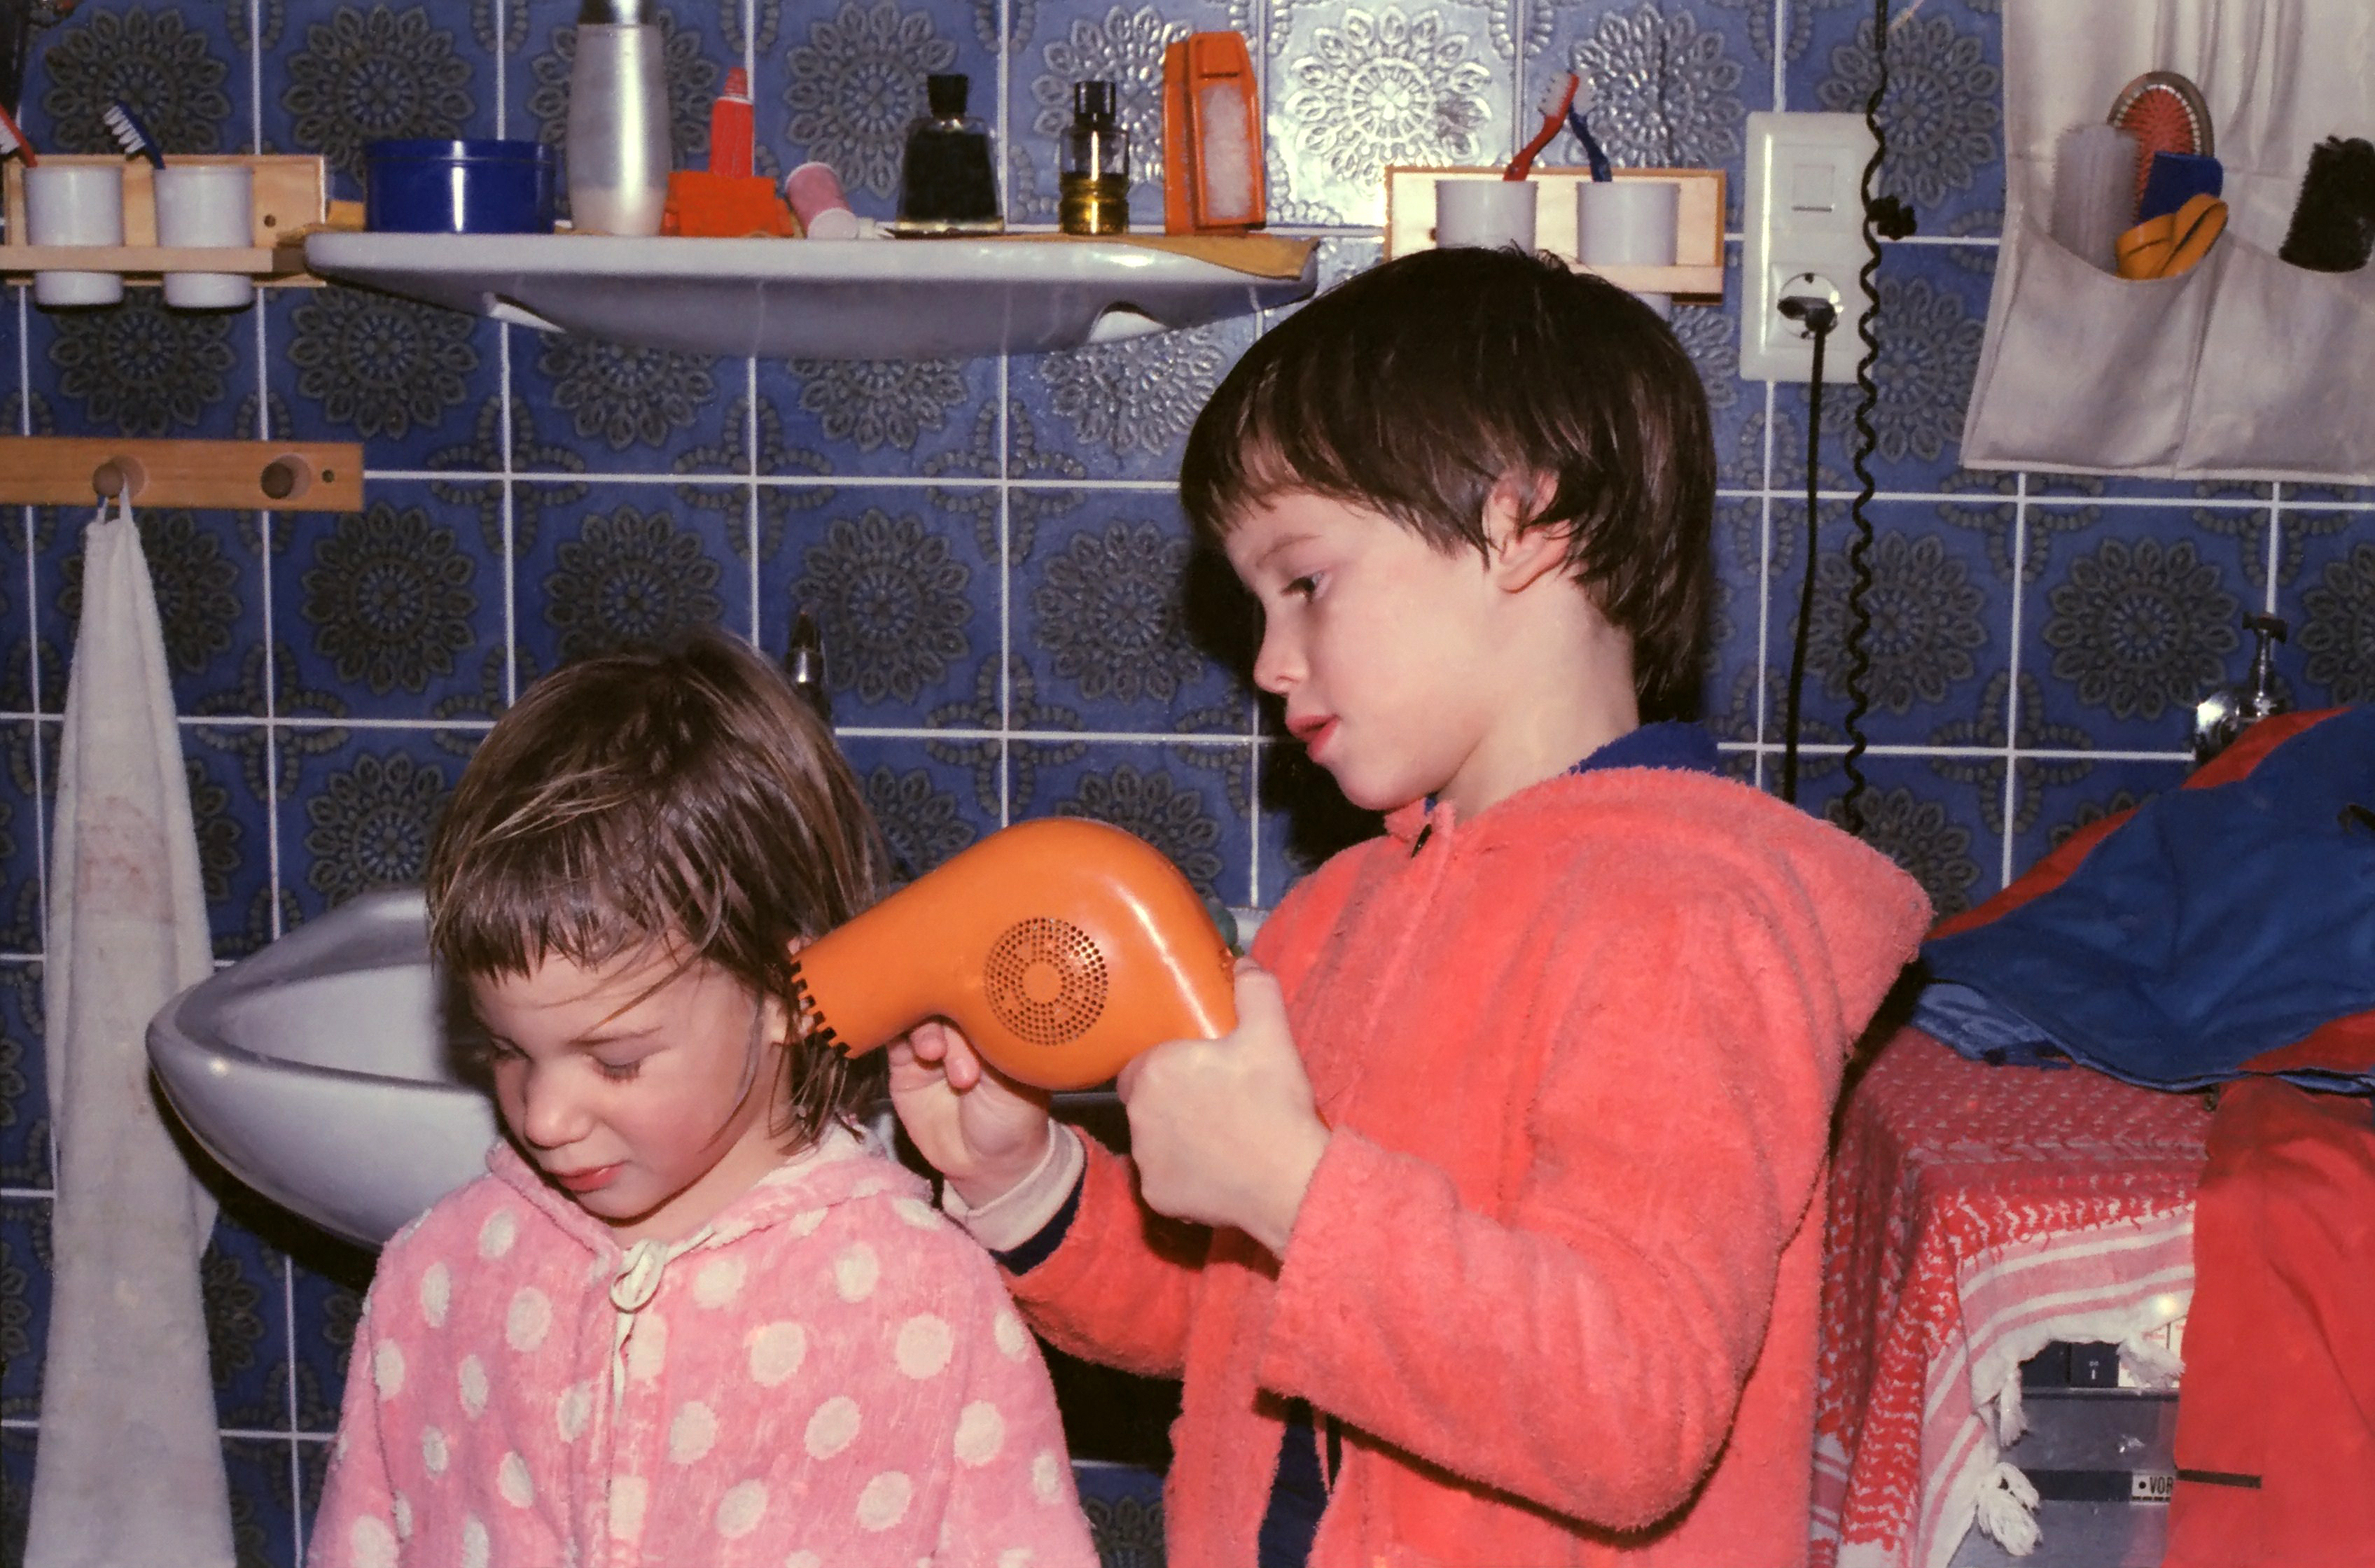 A brother is helping her sister blow dry her hair